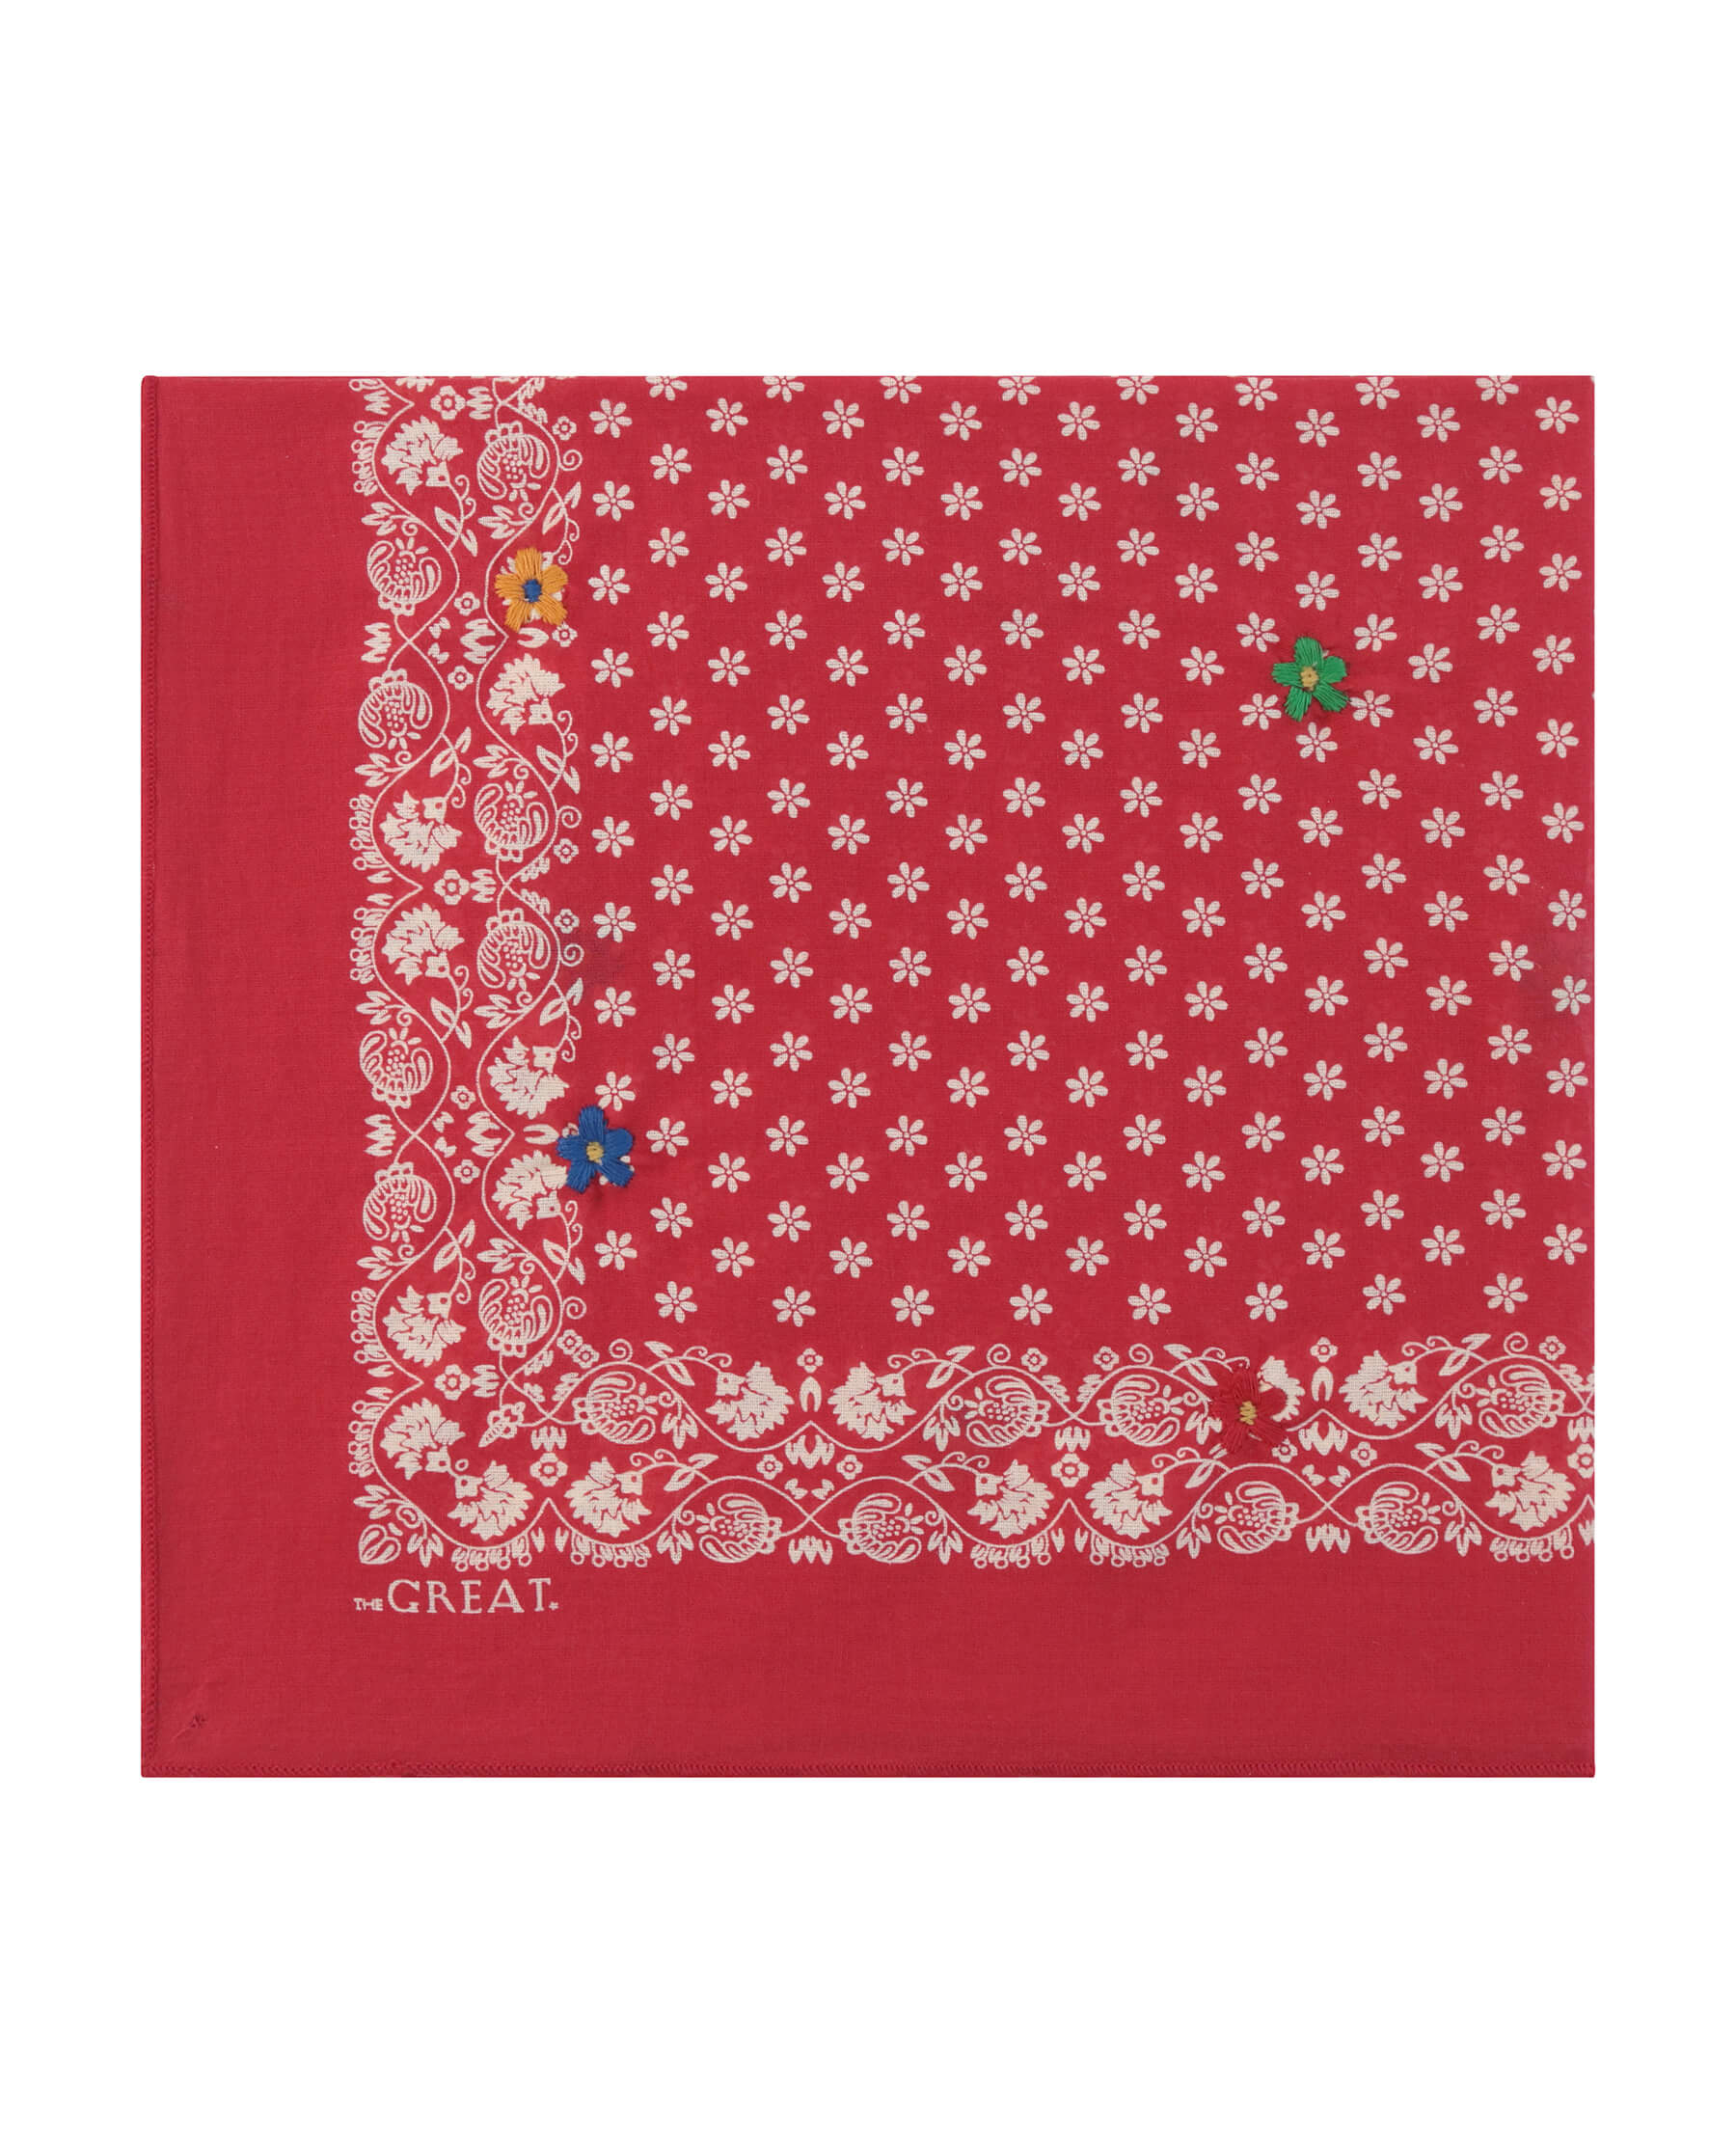 The Bandana with Embroidered Daisies. -- Bright Red with Multi